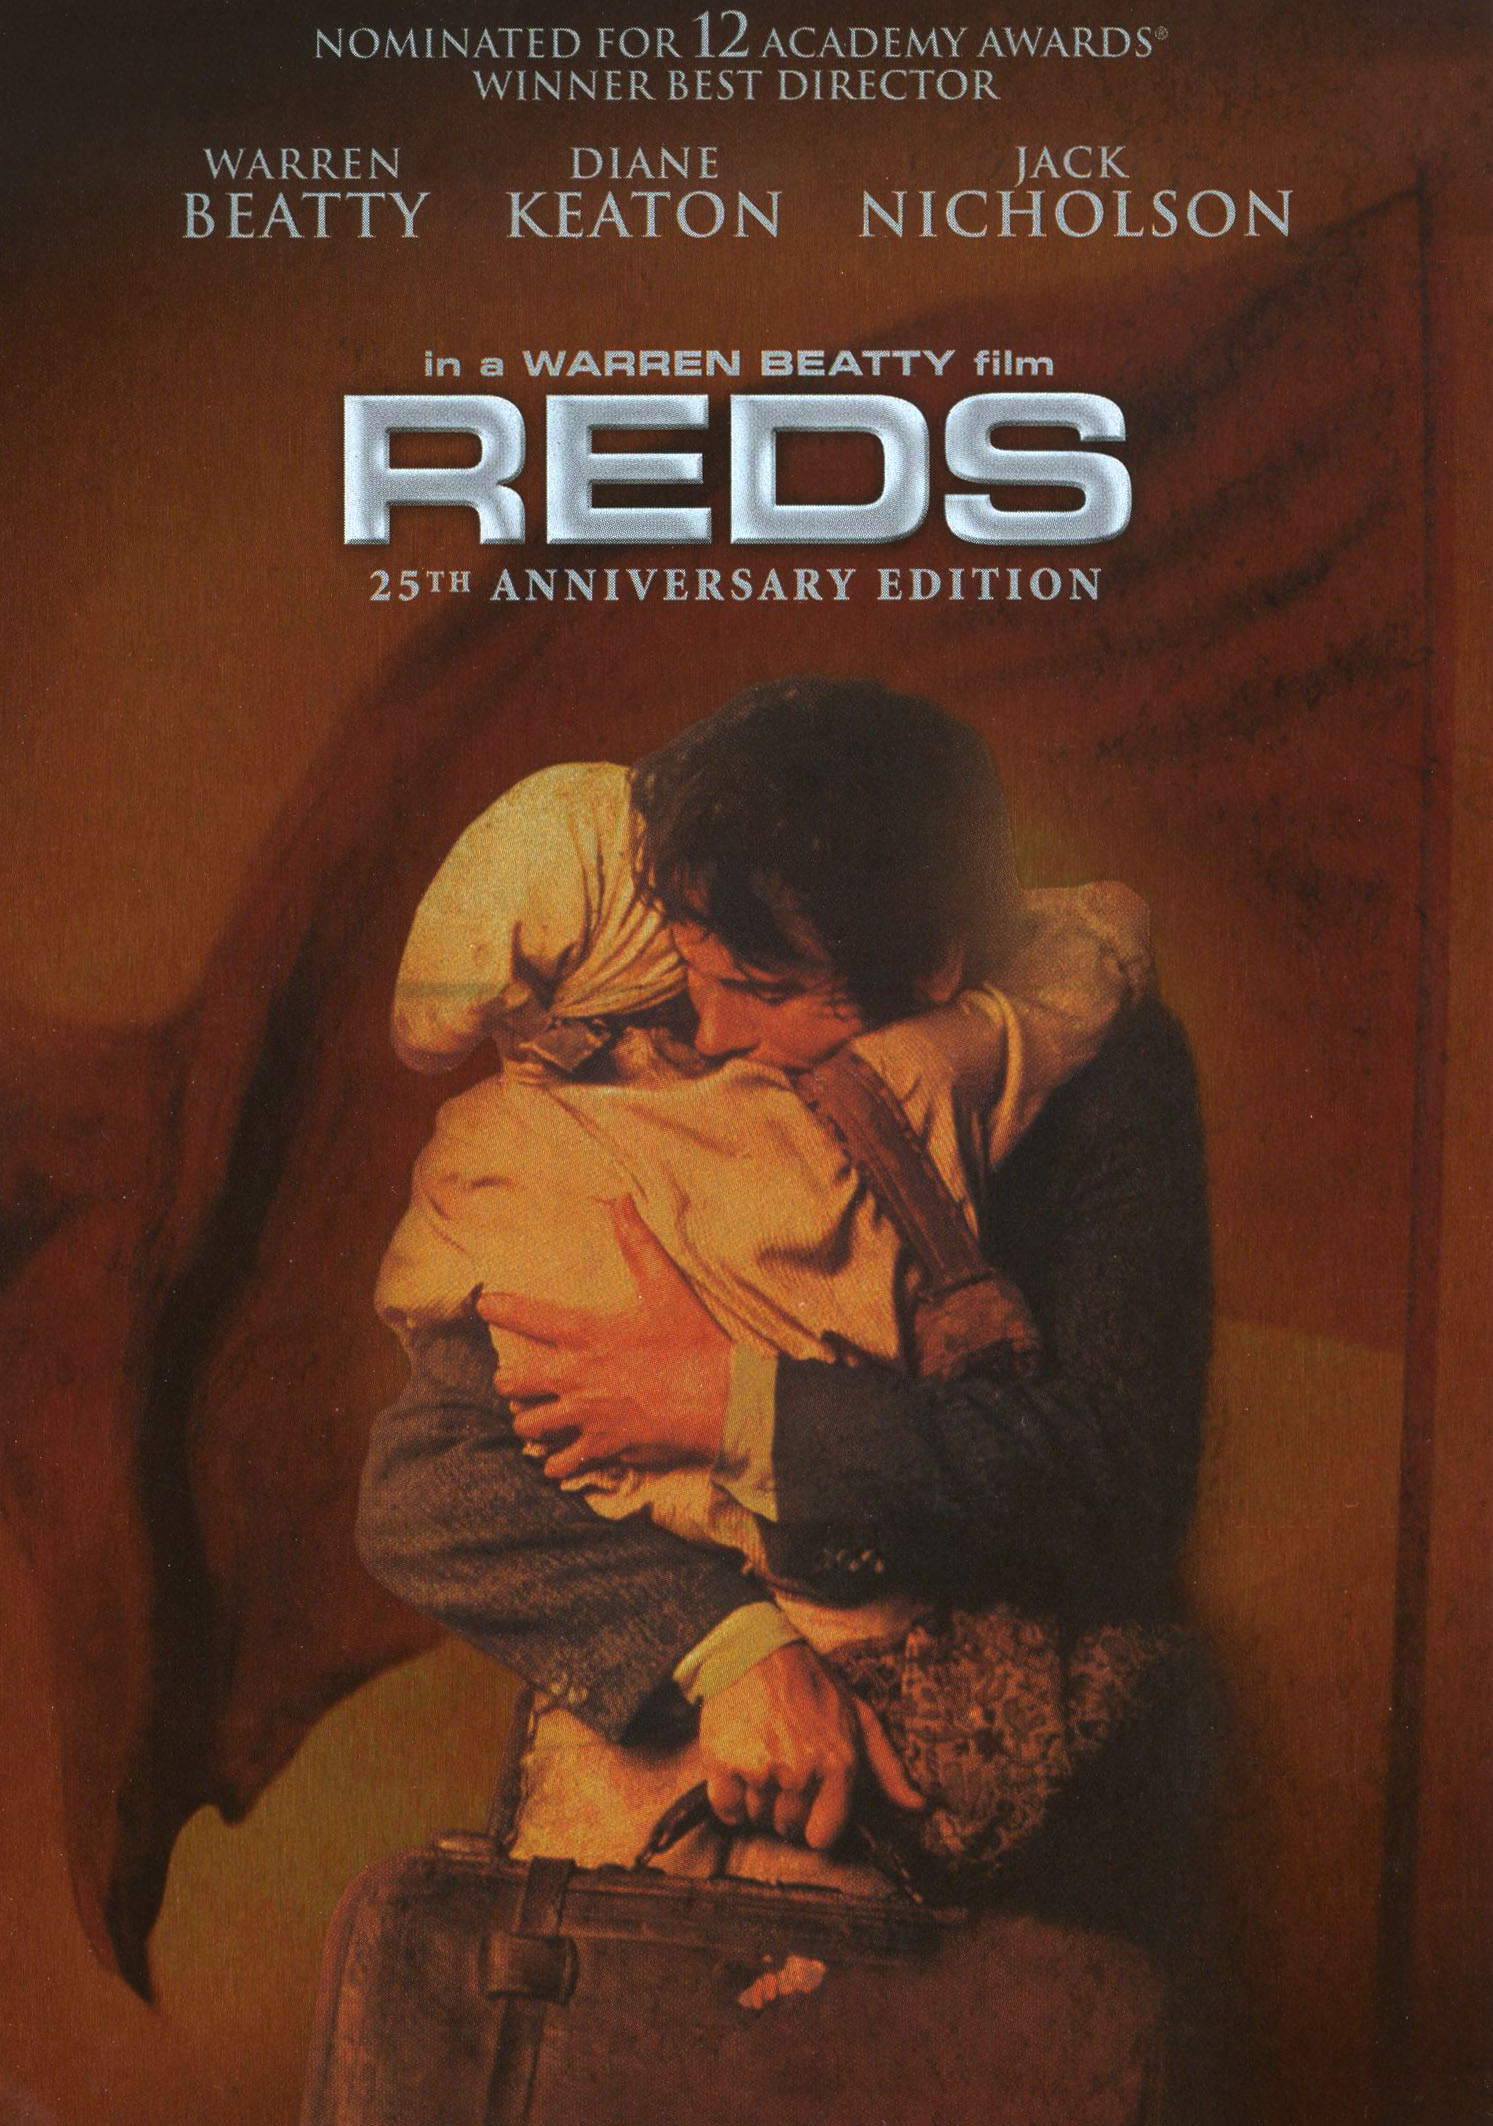 Reds [25th Anniversary Edition] [2 Discs] [DVD] [1981]